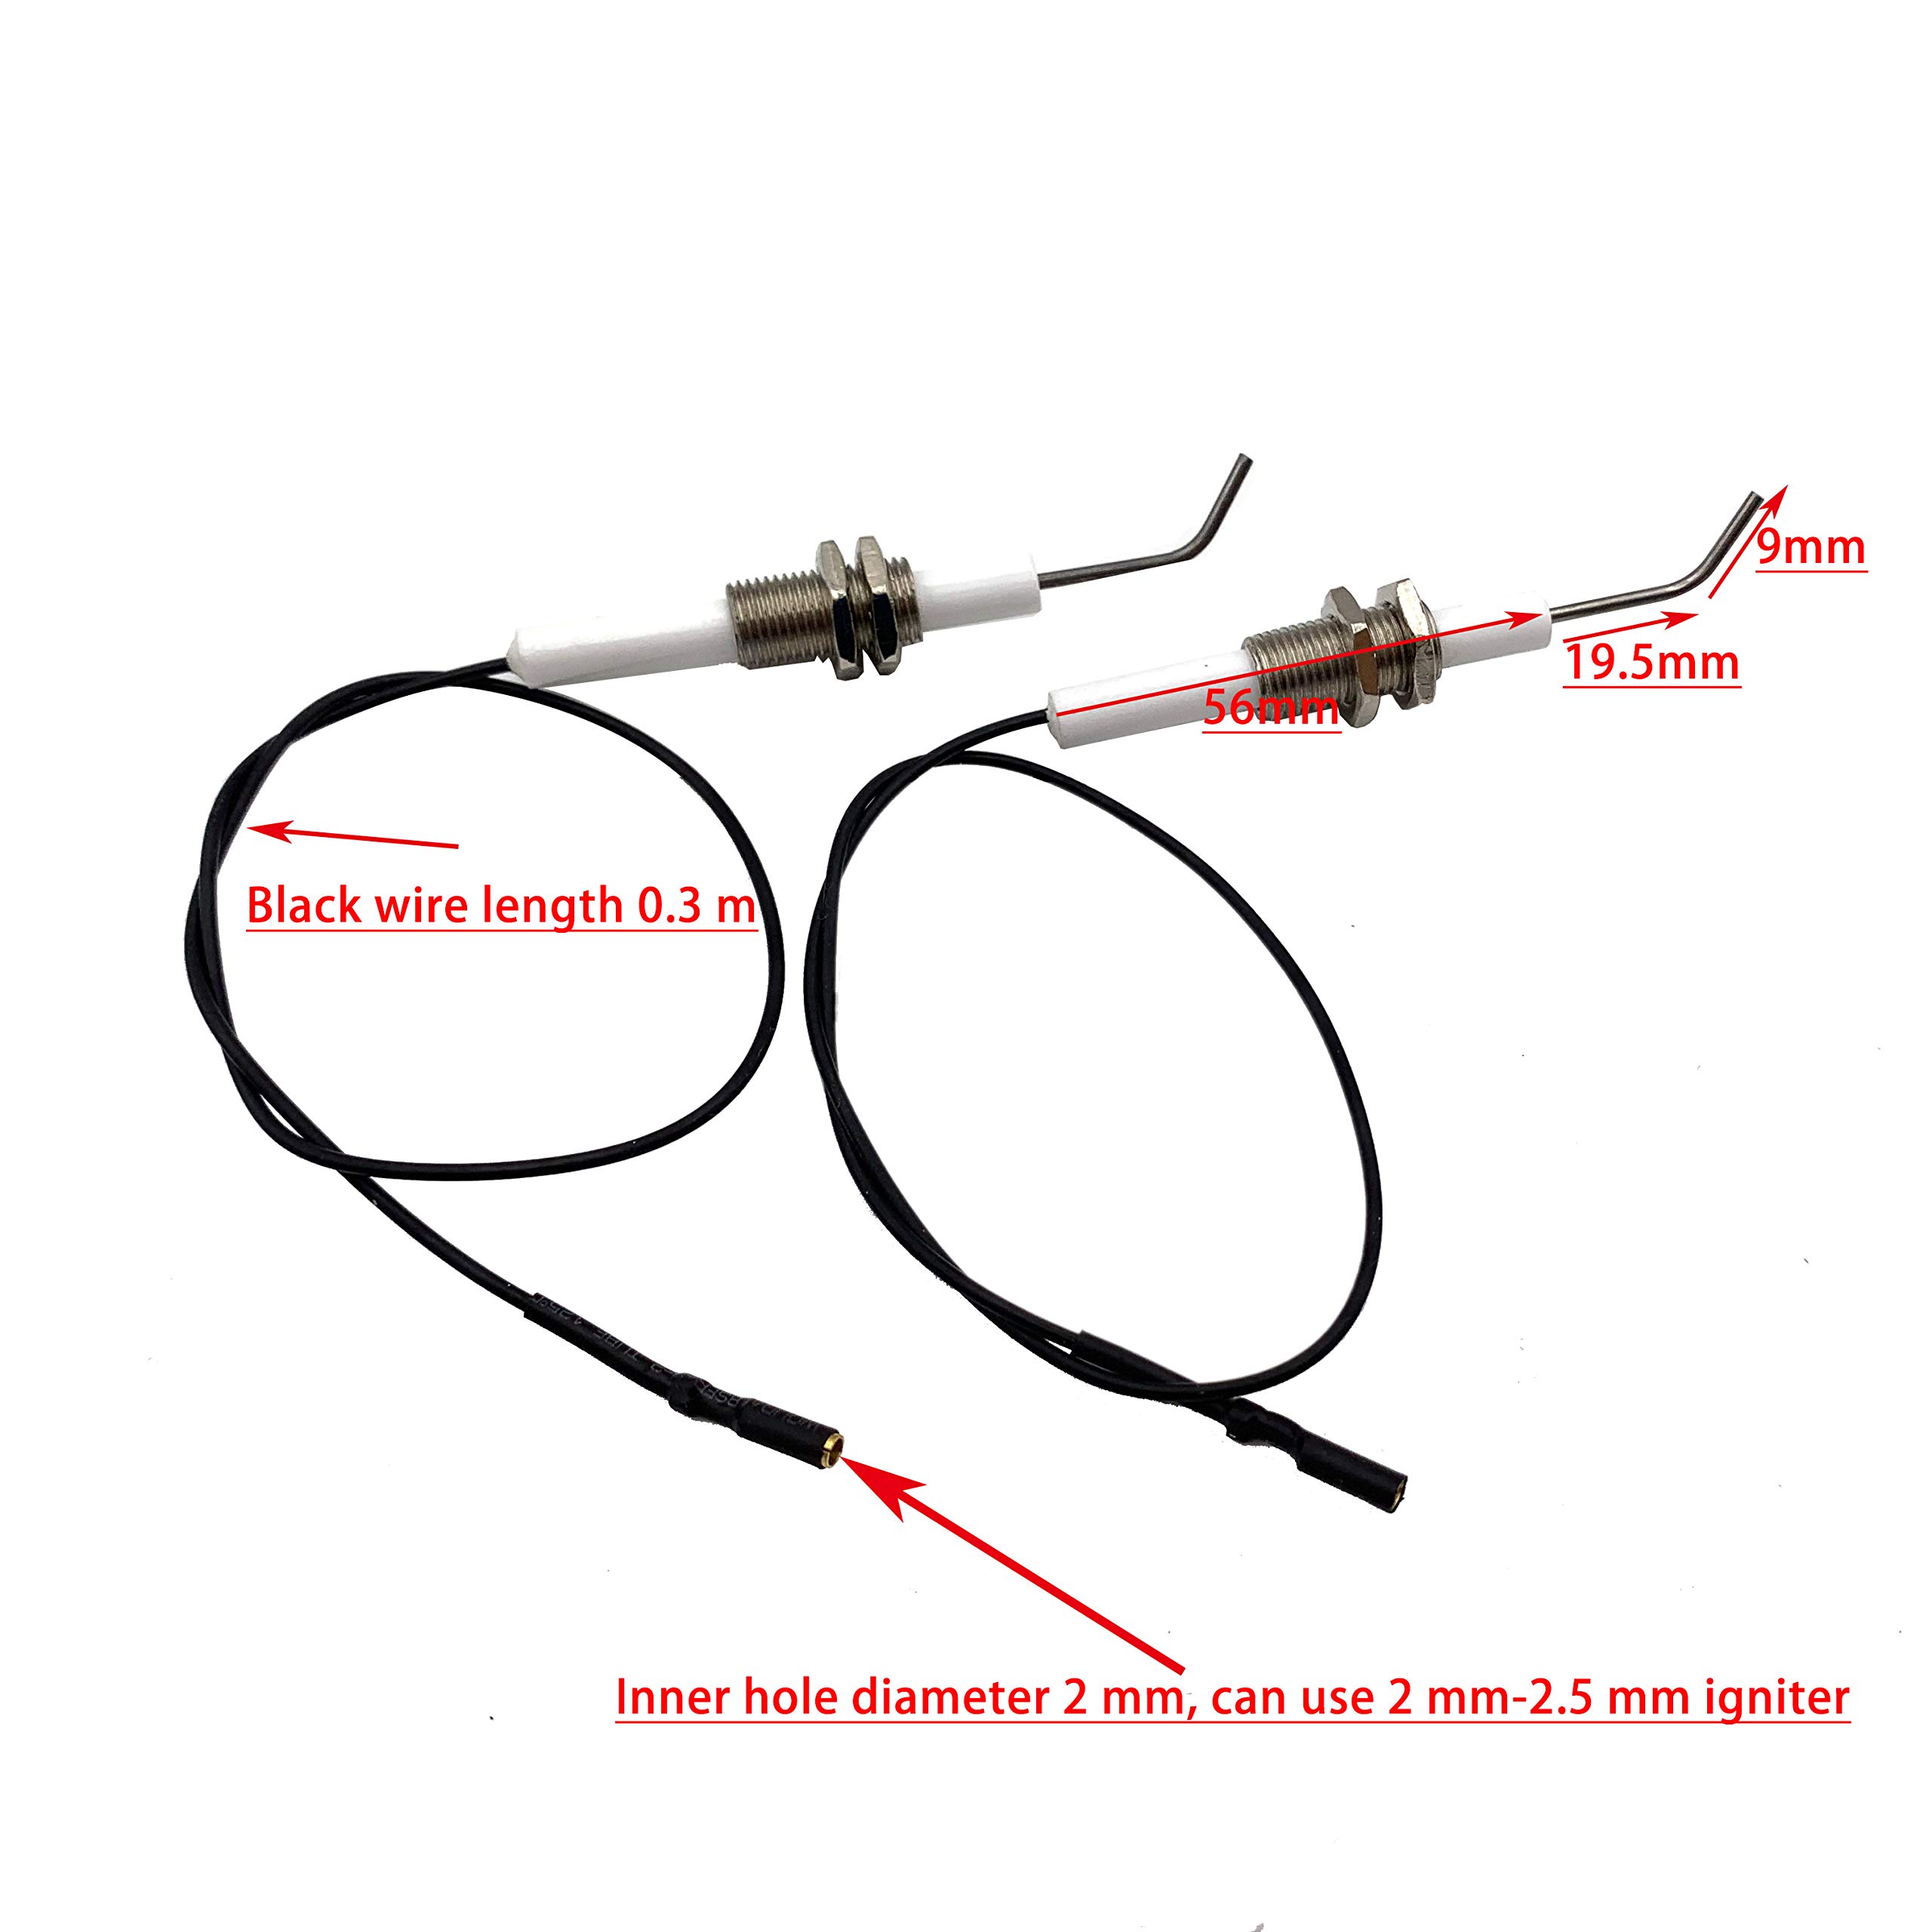 METER STAR Gas Grill/Range/Heater/Grill Igniters,Push Button Piezo Igniter with Threaded Universal Ceramic Electrode Ignition Spark Plug Wire Long 11.8” Electronic Device Set of 2